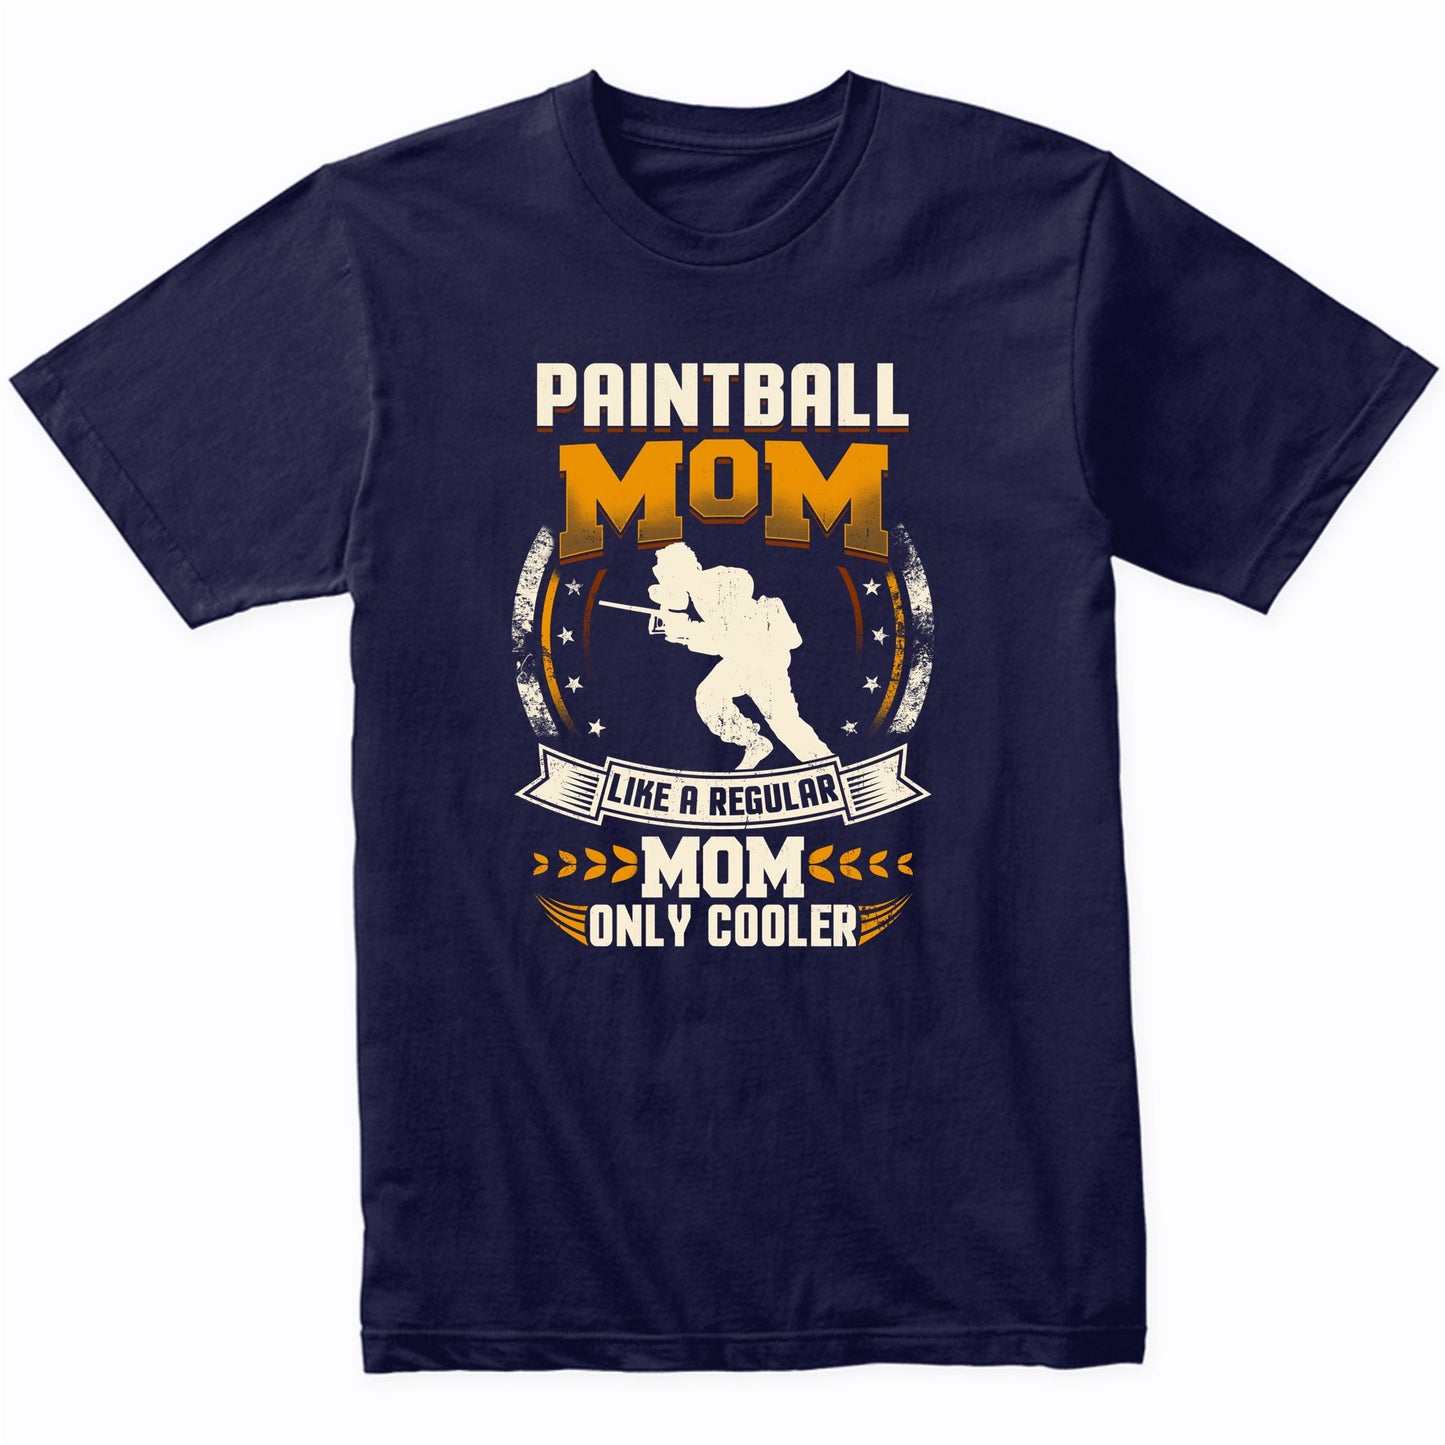 Paintball Mom Like A Regular Mom Only Cooler Funny T-Shirt